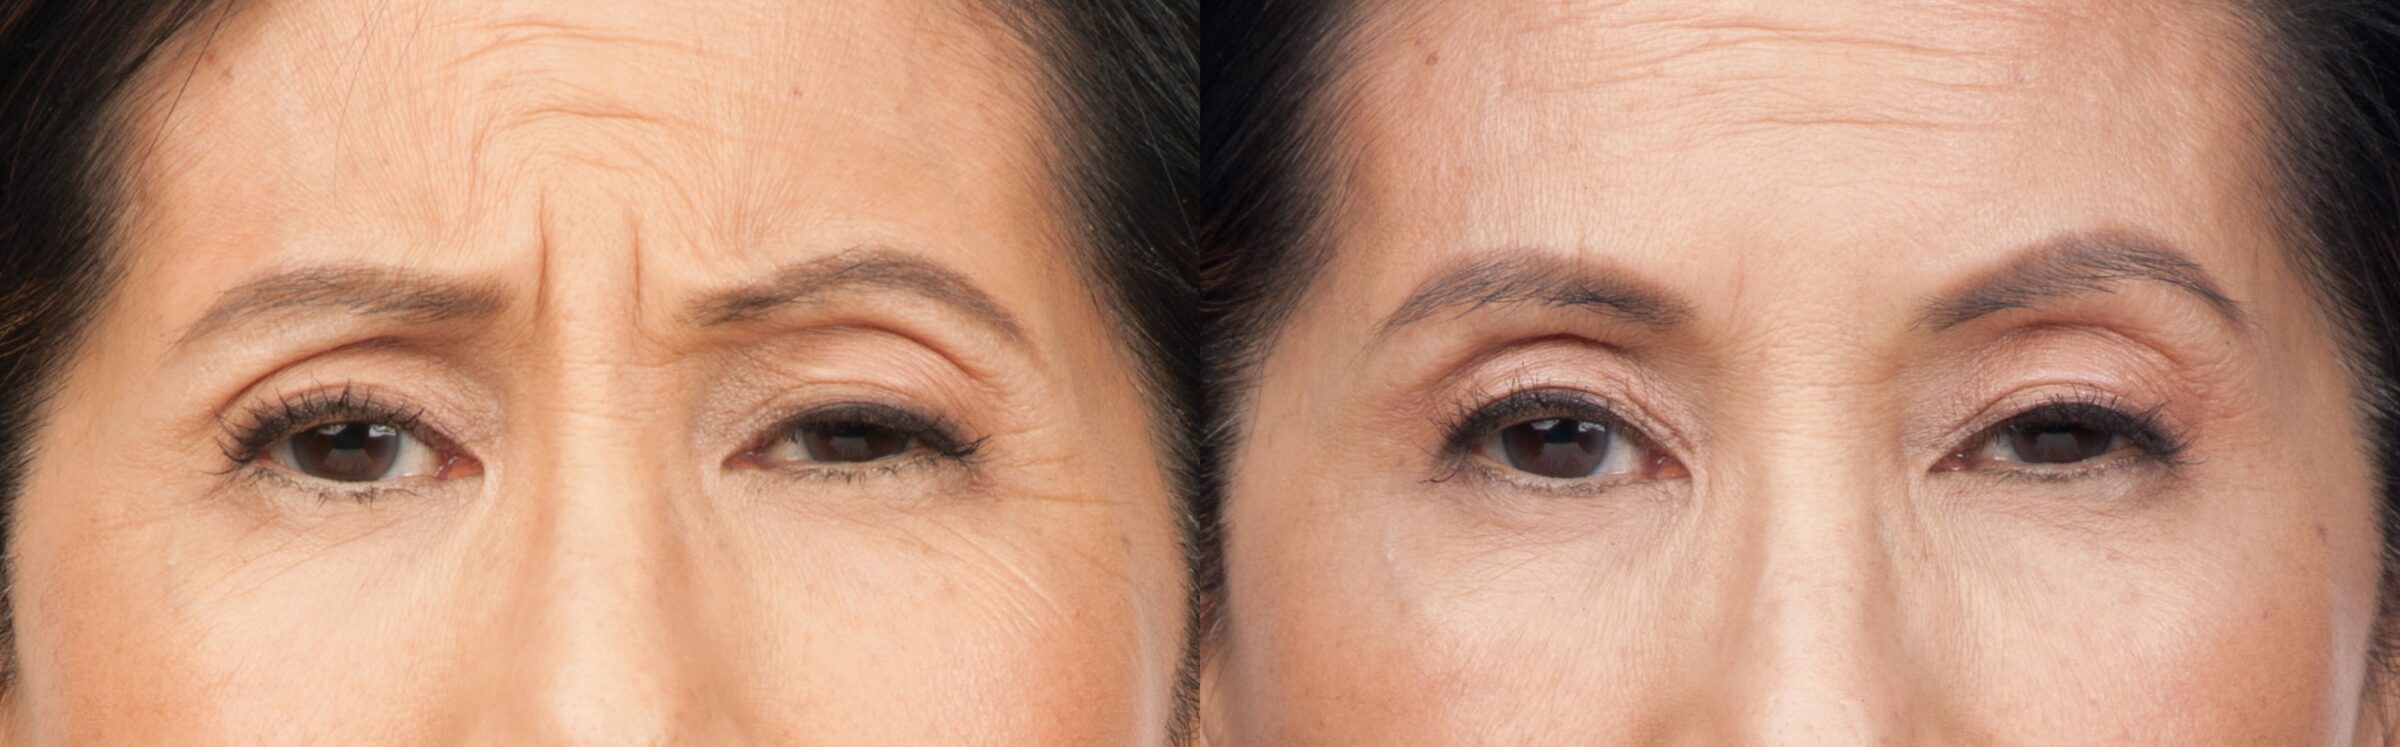 woman frowning before and after botox